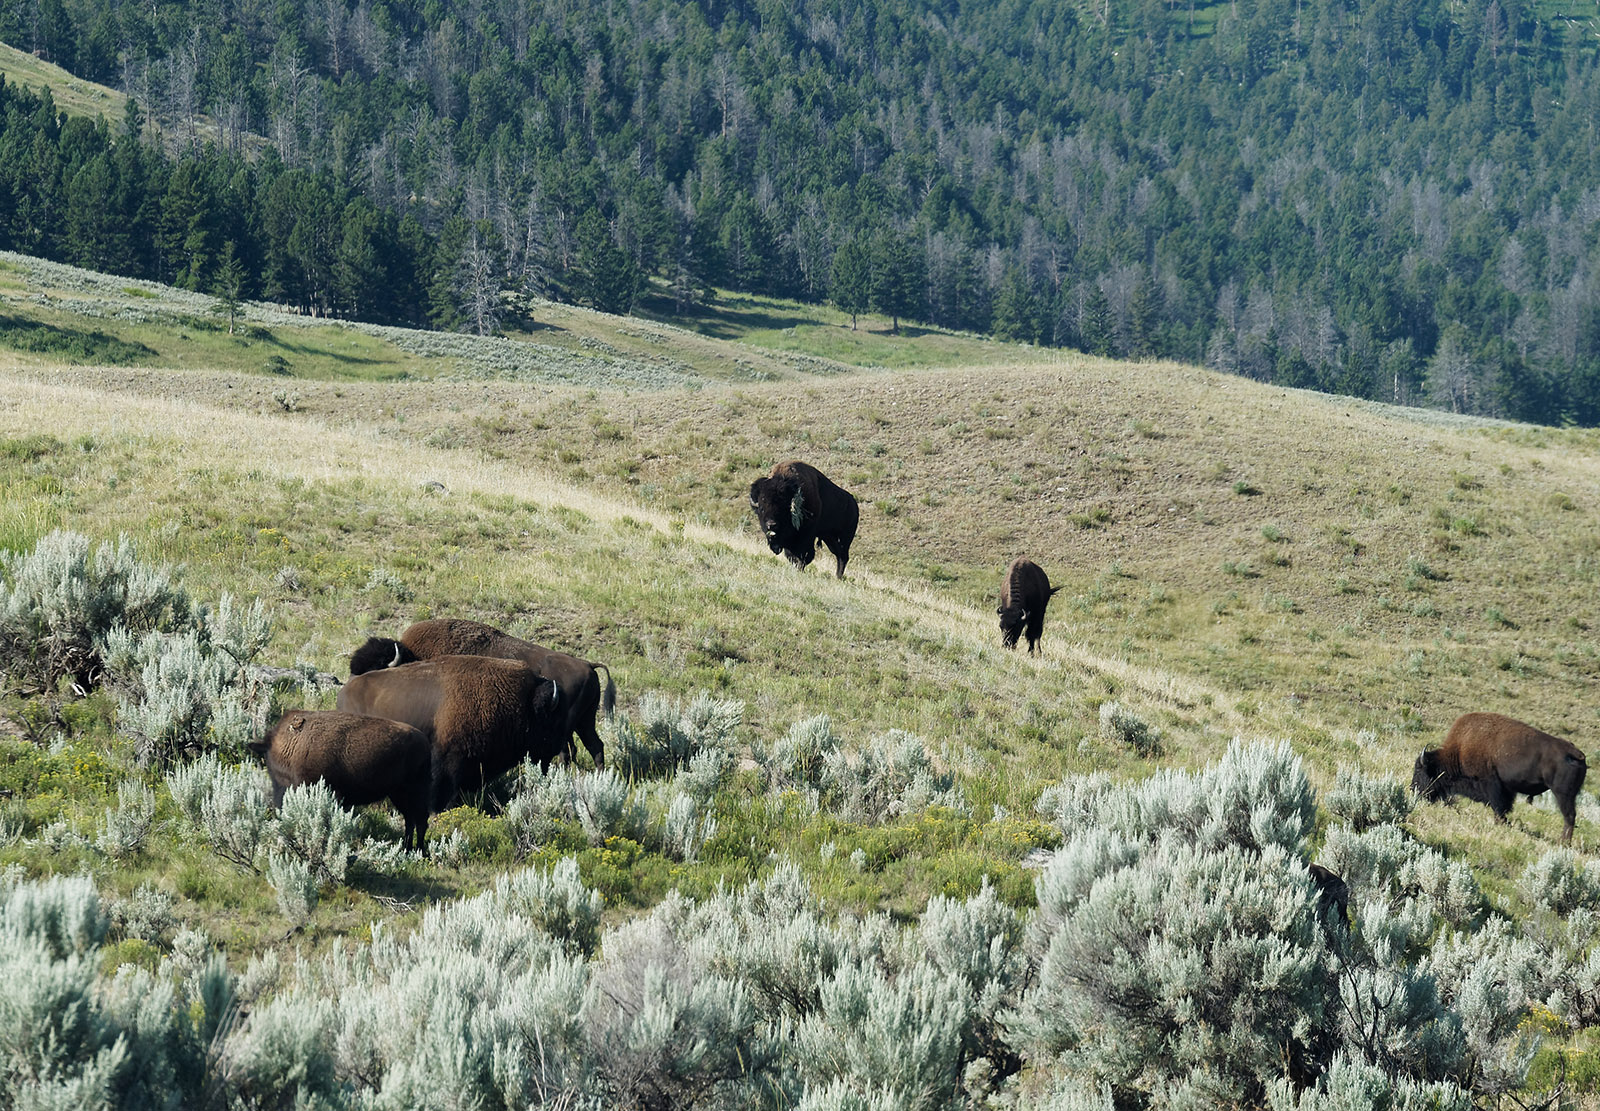 Bison in Lamar River Valley near the trail that I took to hike to Specimen Ridge.